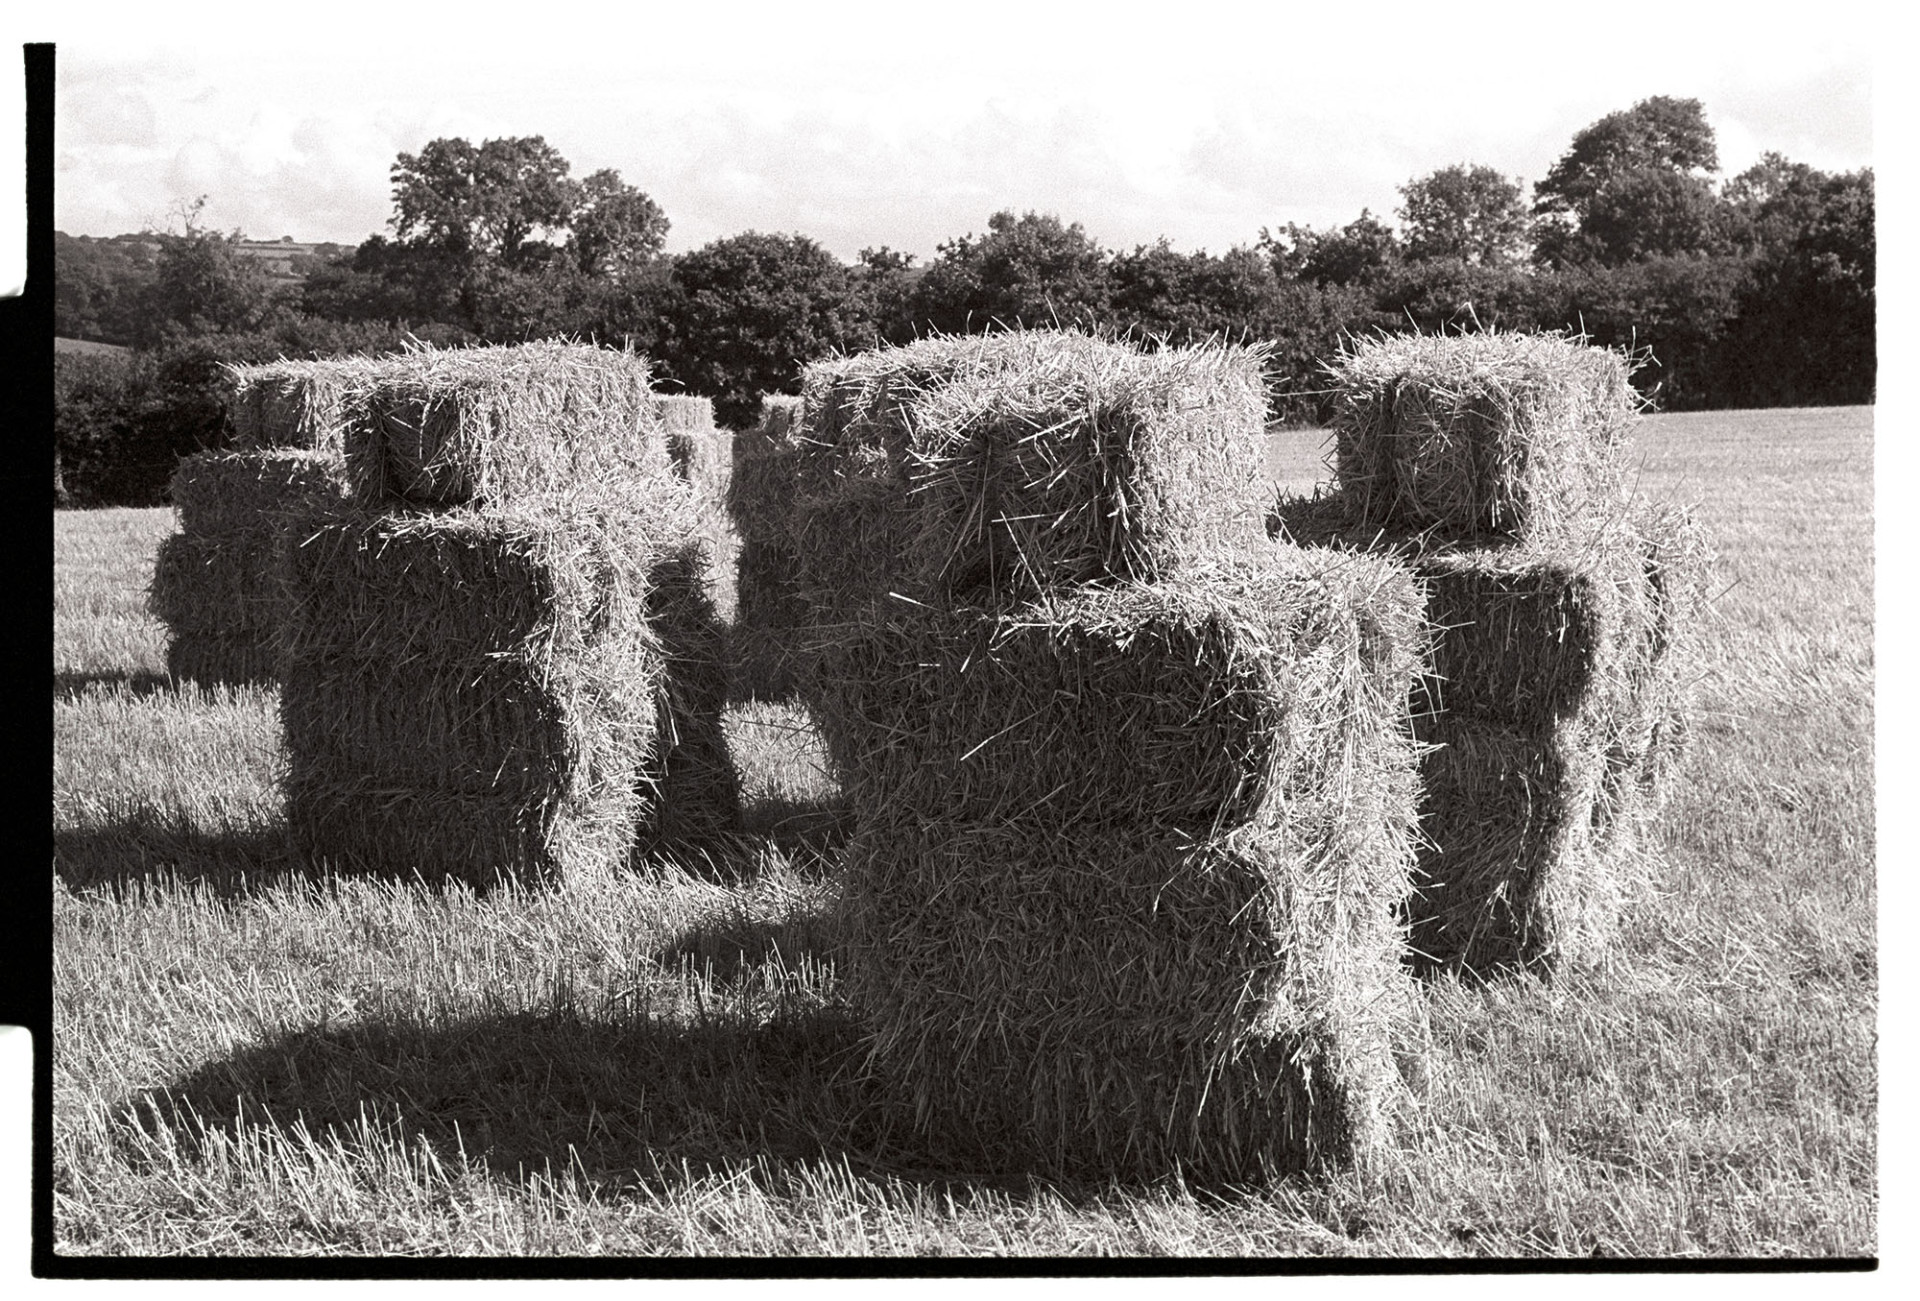 Hay bales stacked in field. 
[Hay bales stacked in a field at Lower Langham, Dolton.]